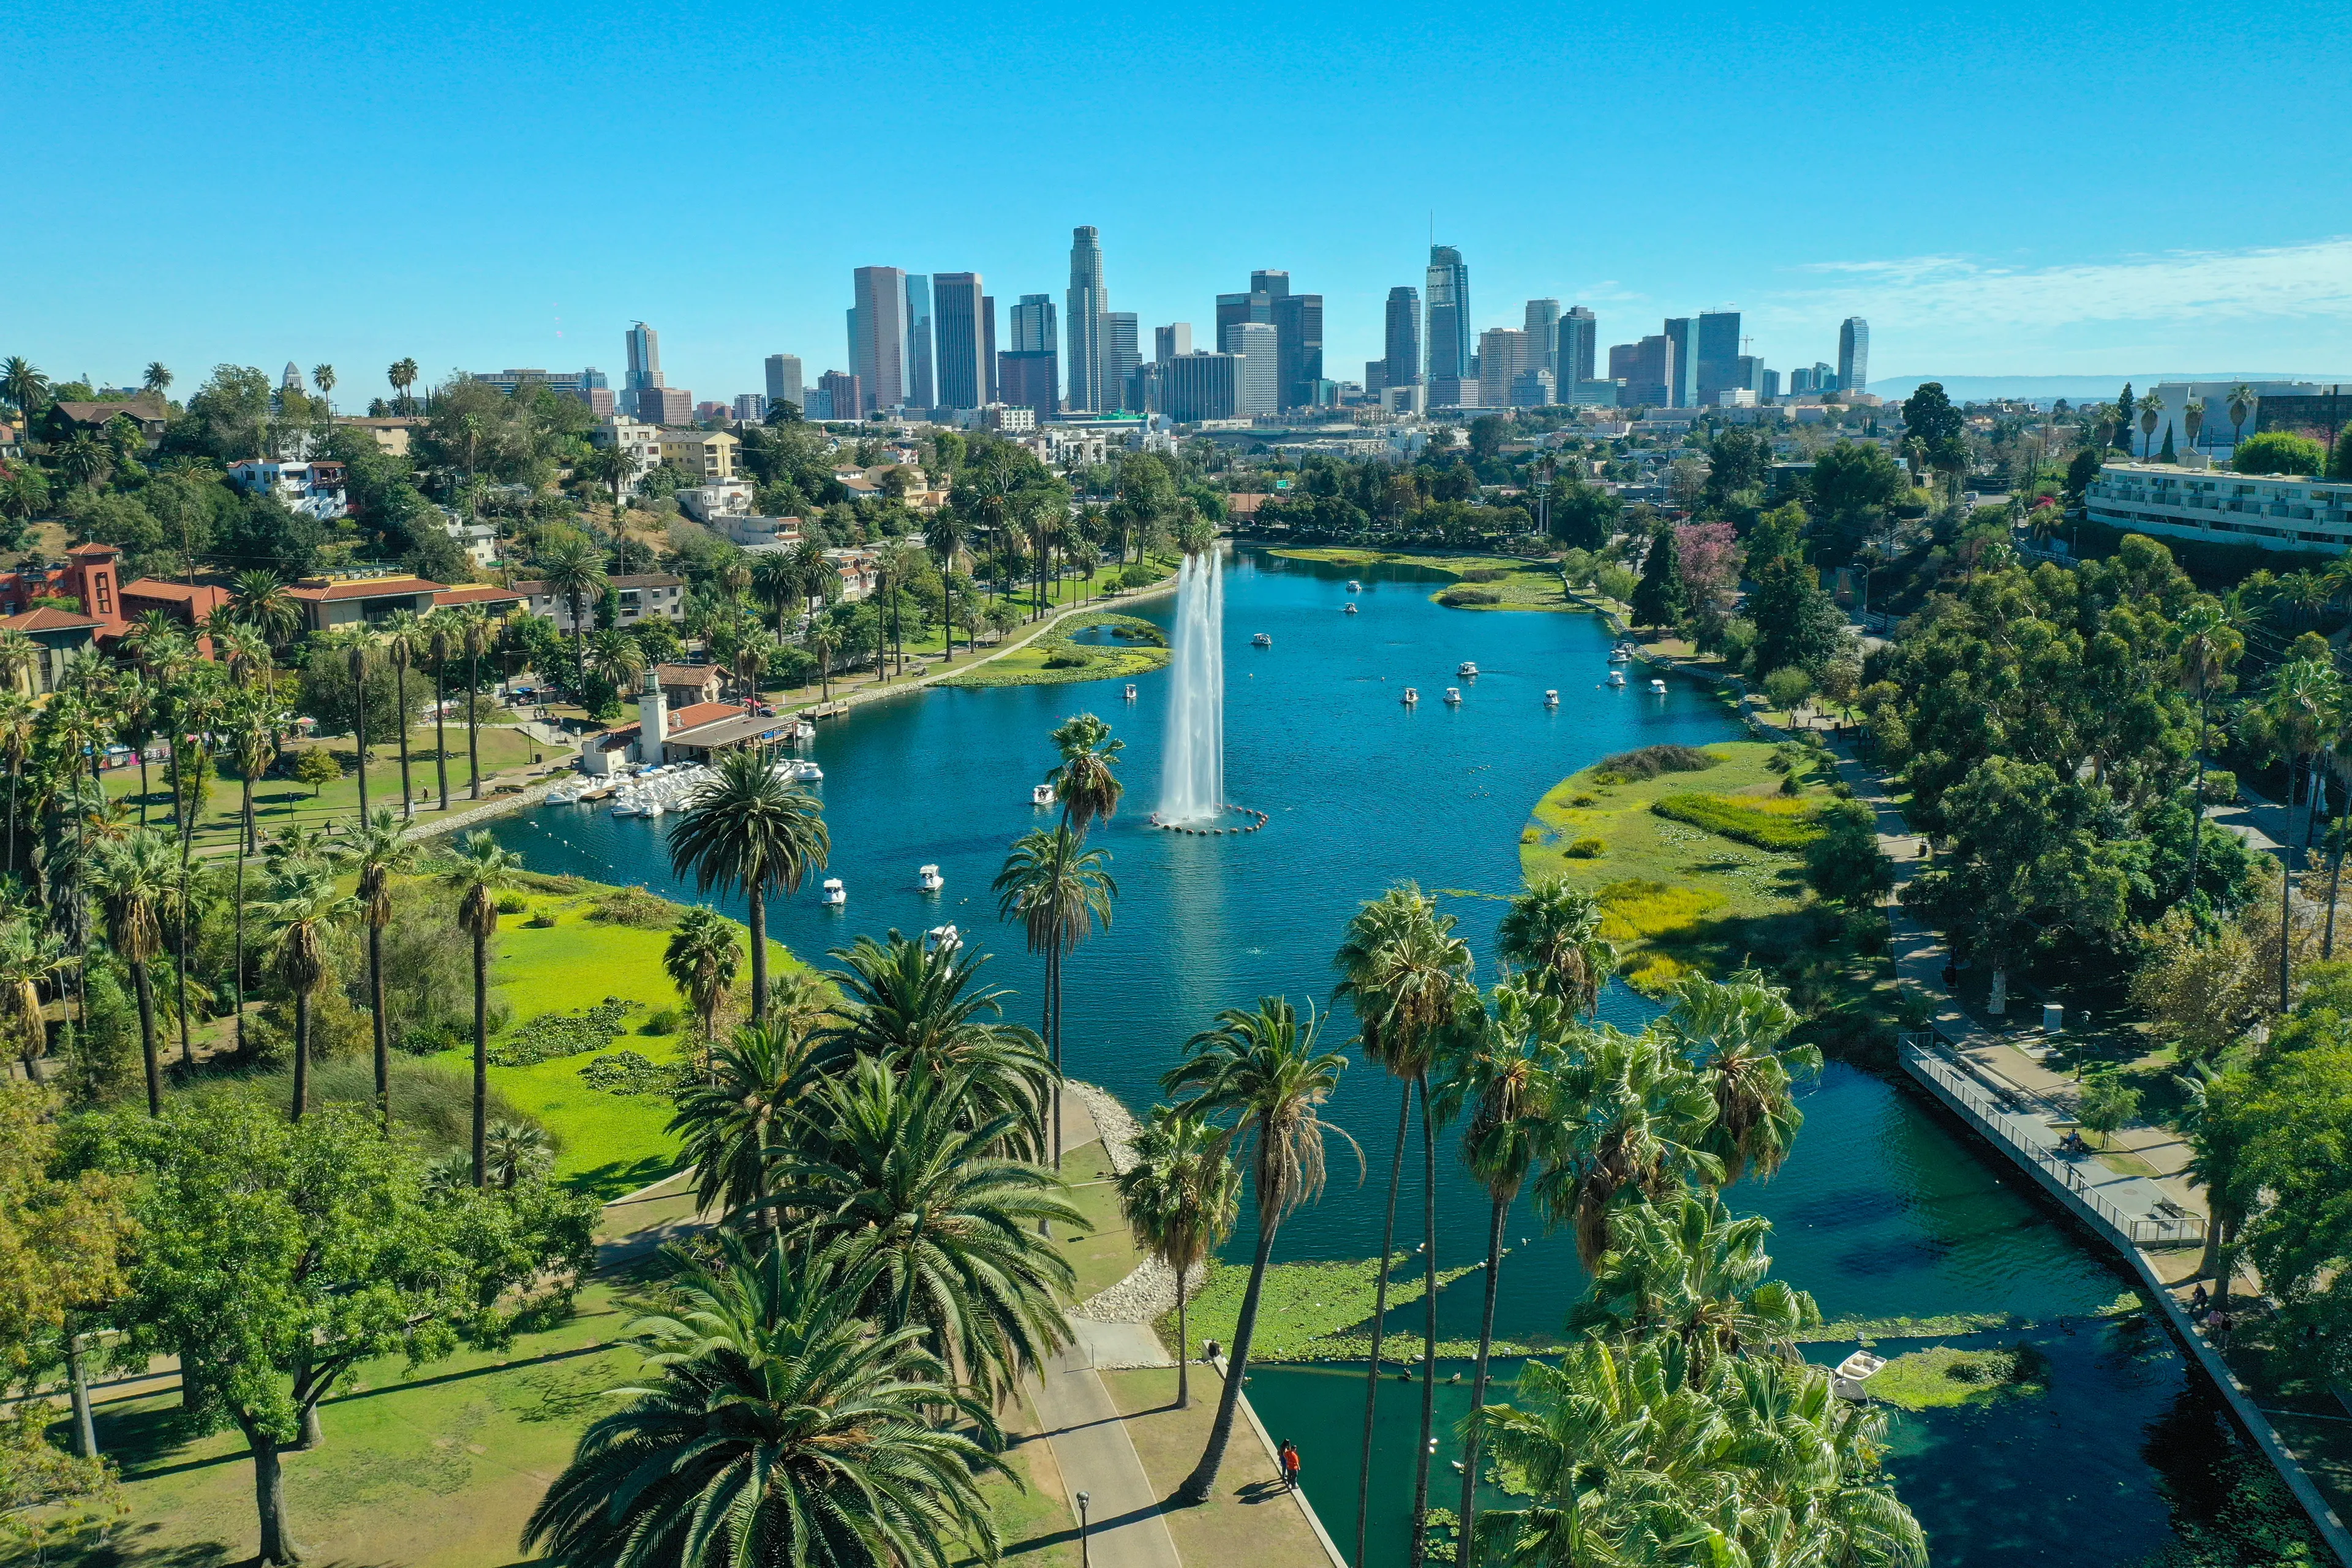 3-Day Unique Los Angeles Itinerary: Relax, Savor, and Shop